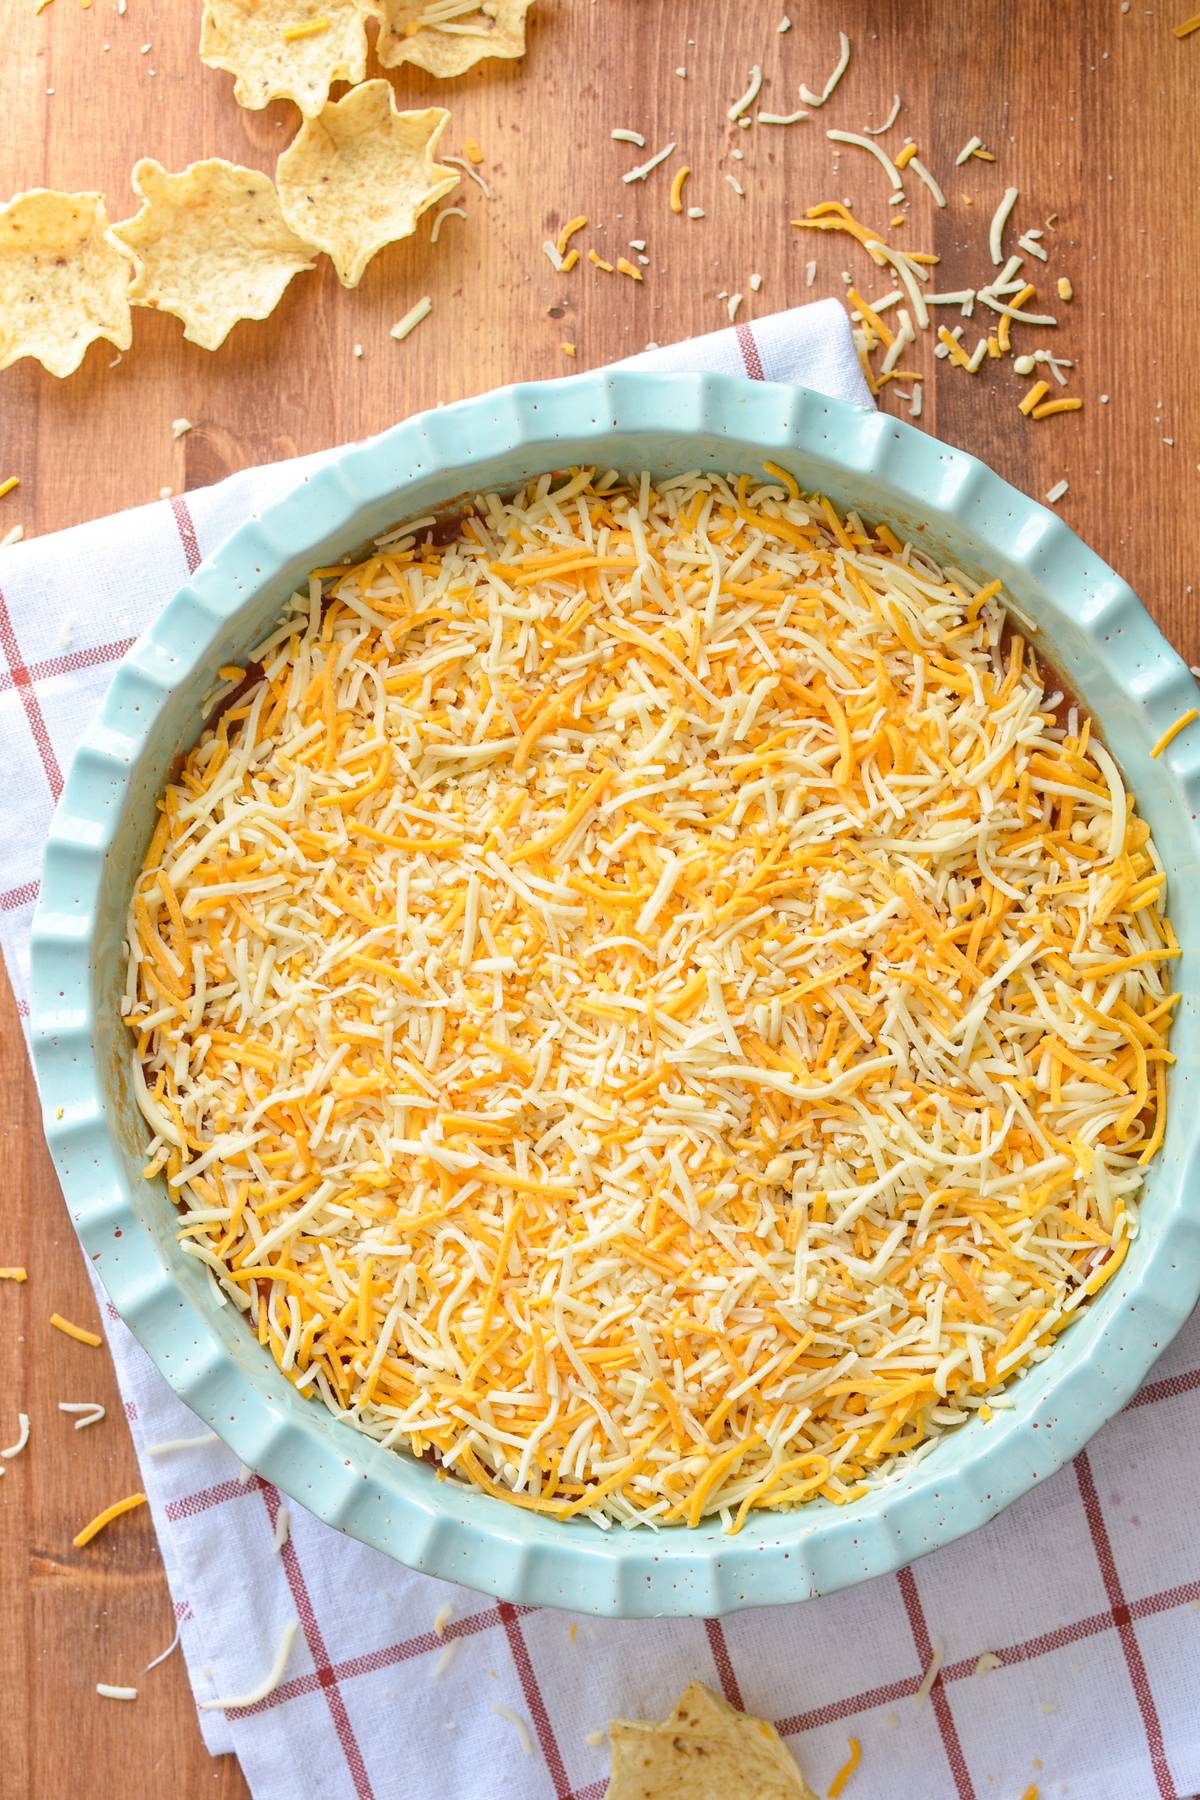 A circular dish filled with a nacho dip - topped with shredded cheese.